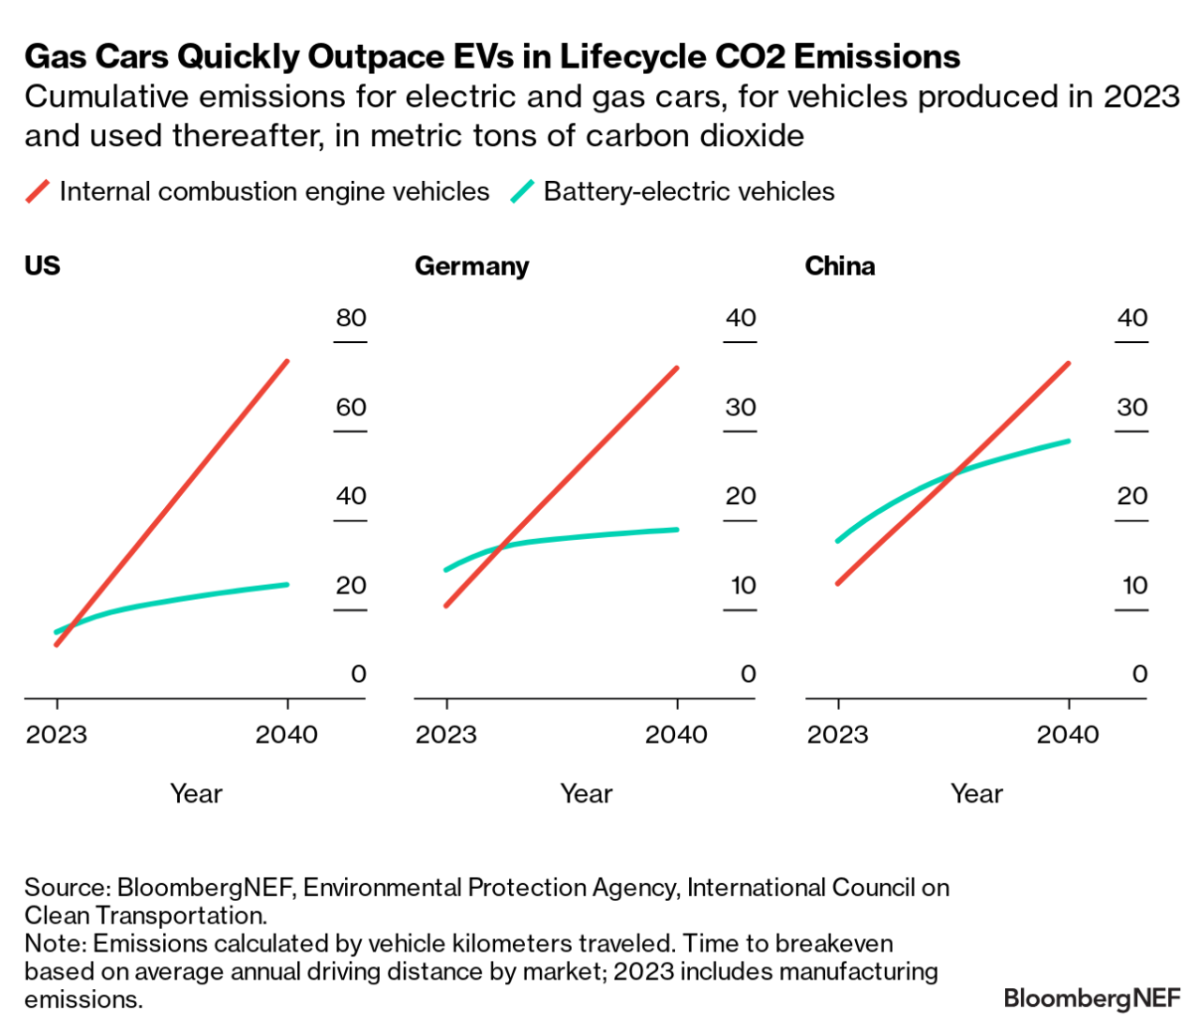 "Gas Cars Quickly Outpace EVs in Lifecycle CO2 Emissions" infographic 